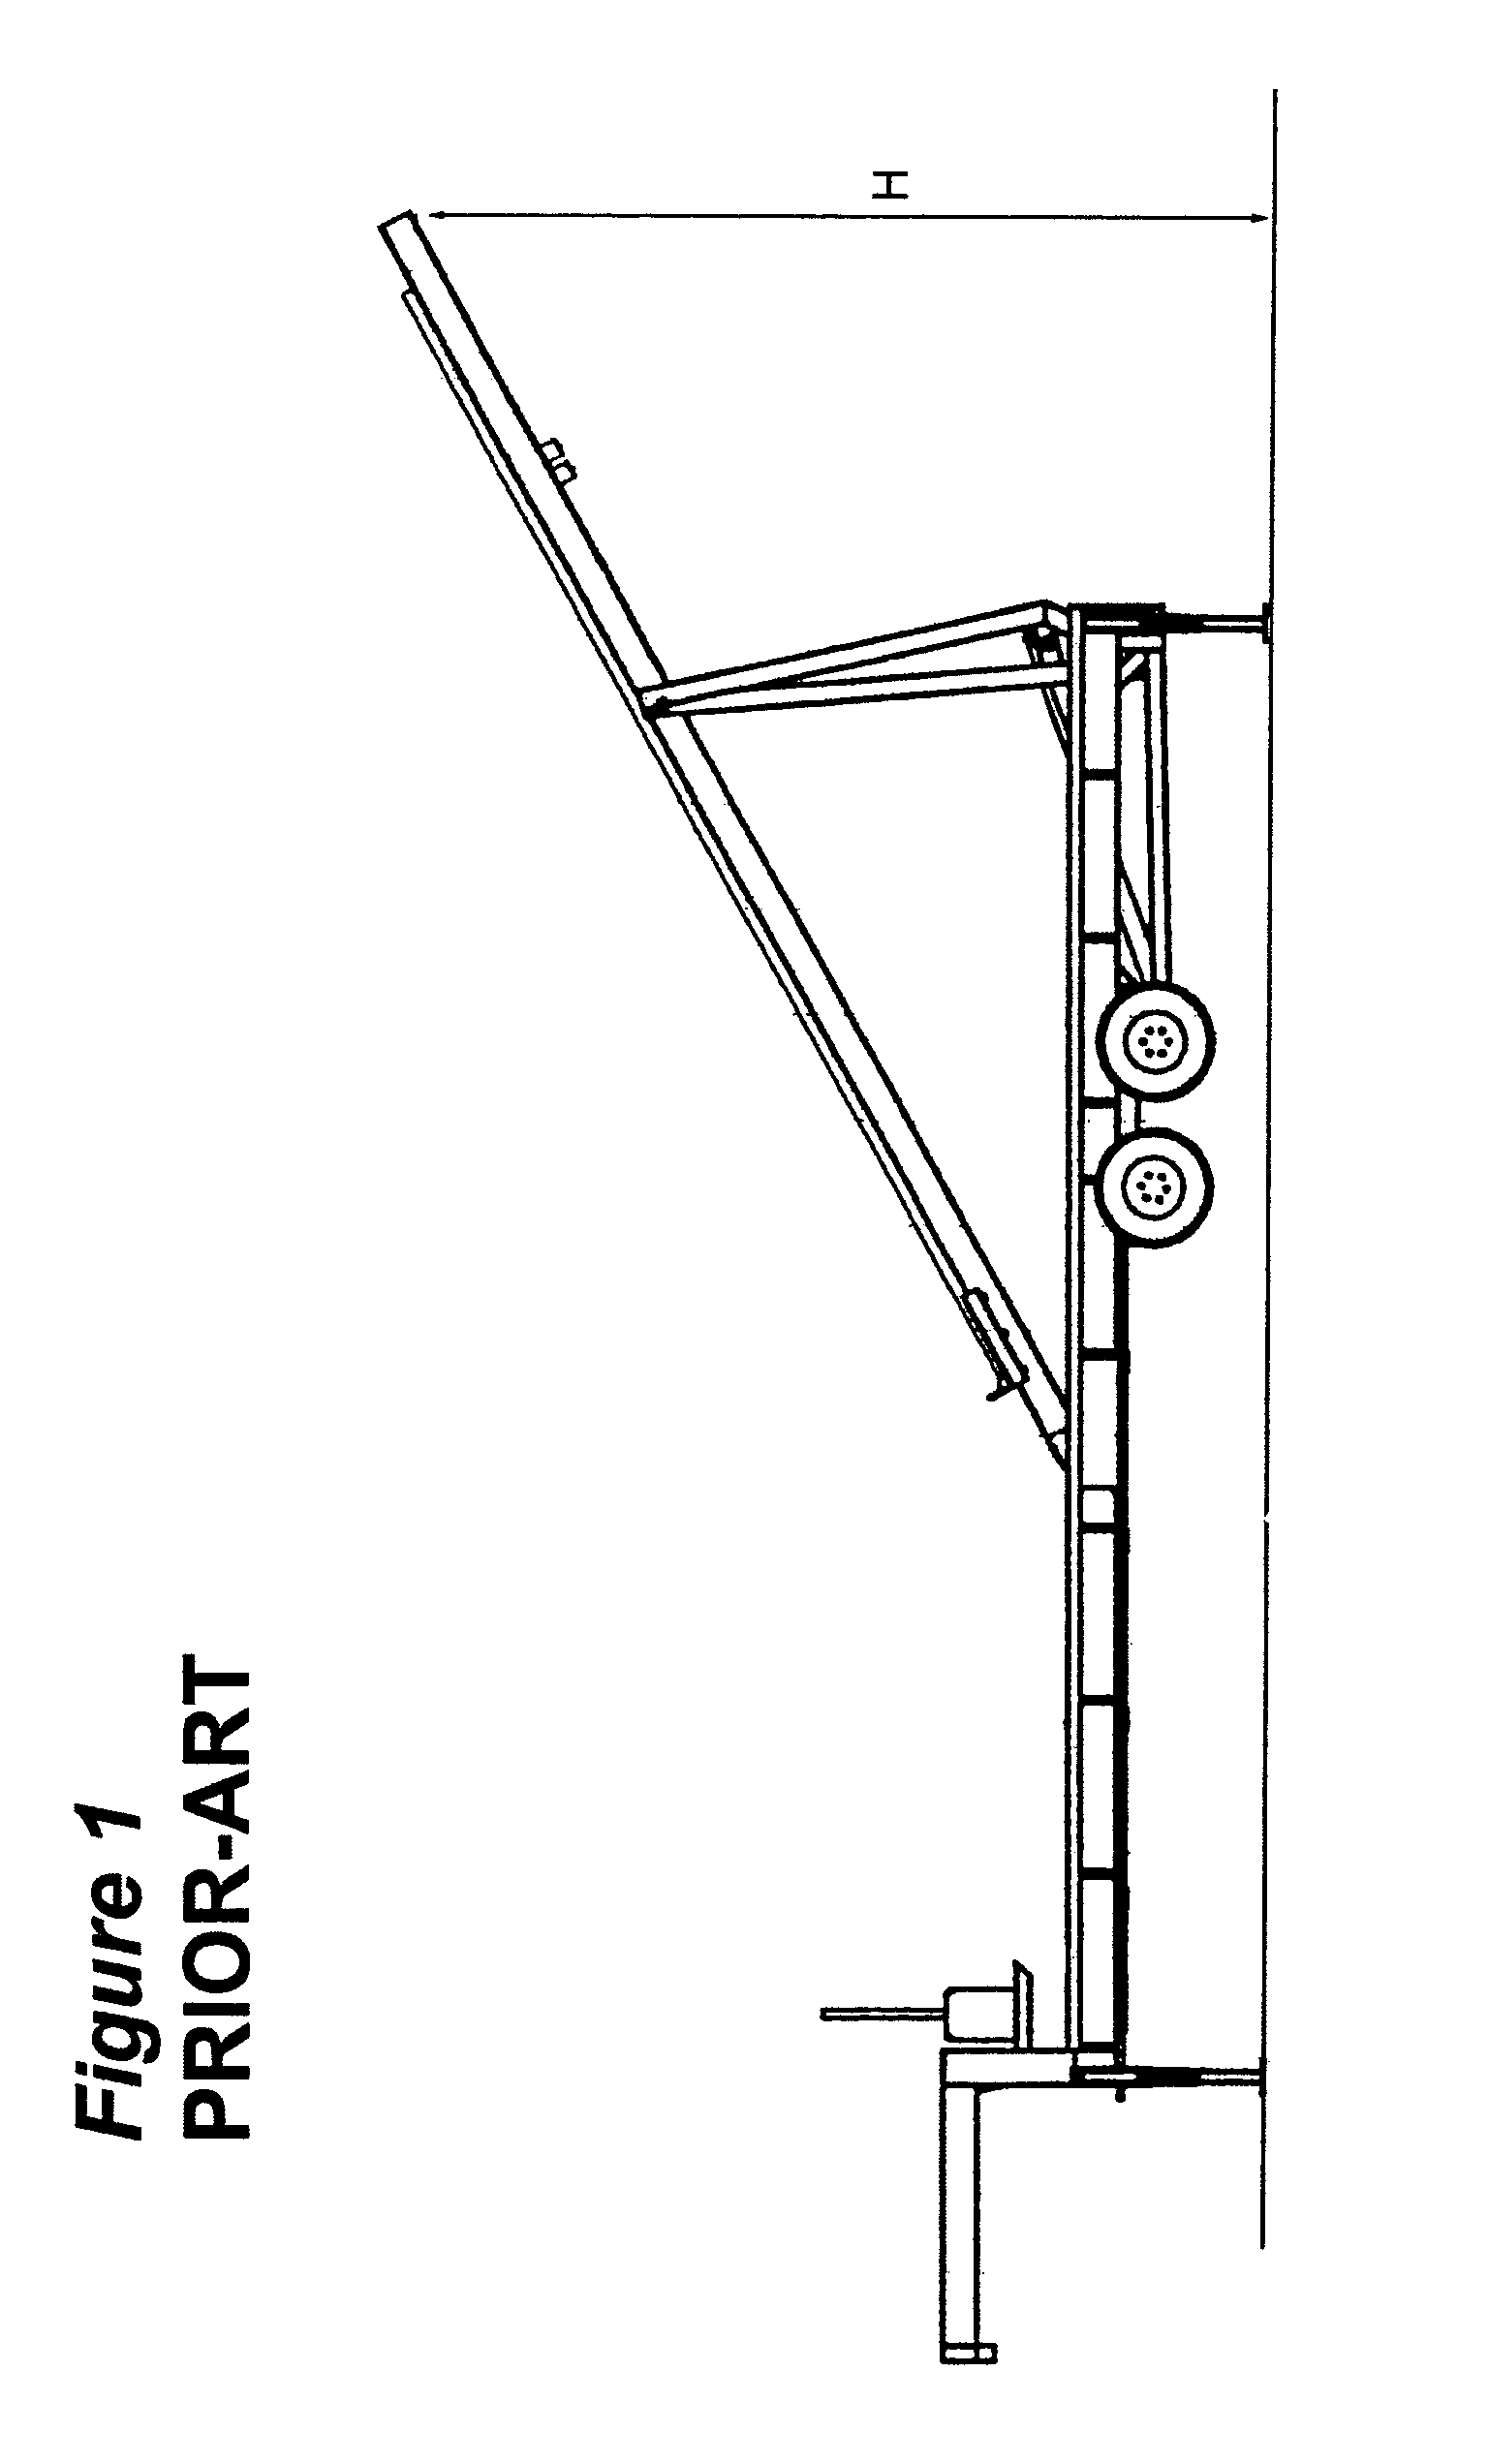 Multi-position height adjustment system for a pipe handling apparatus